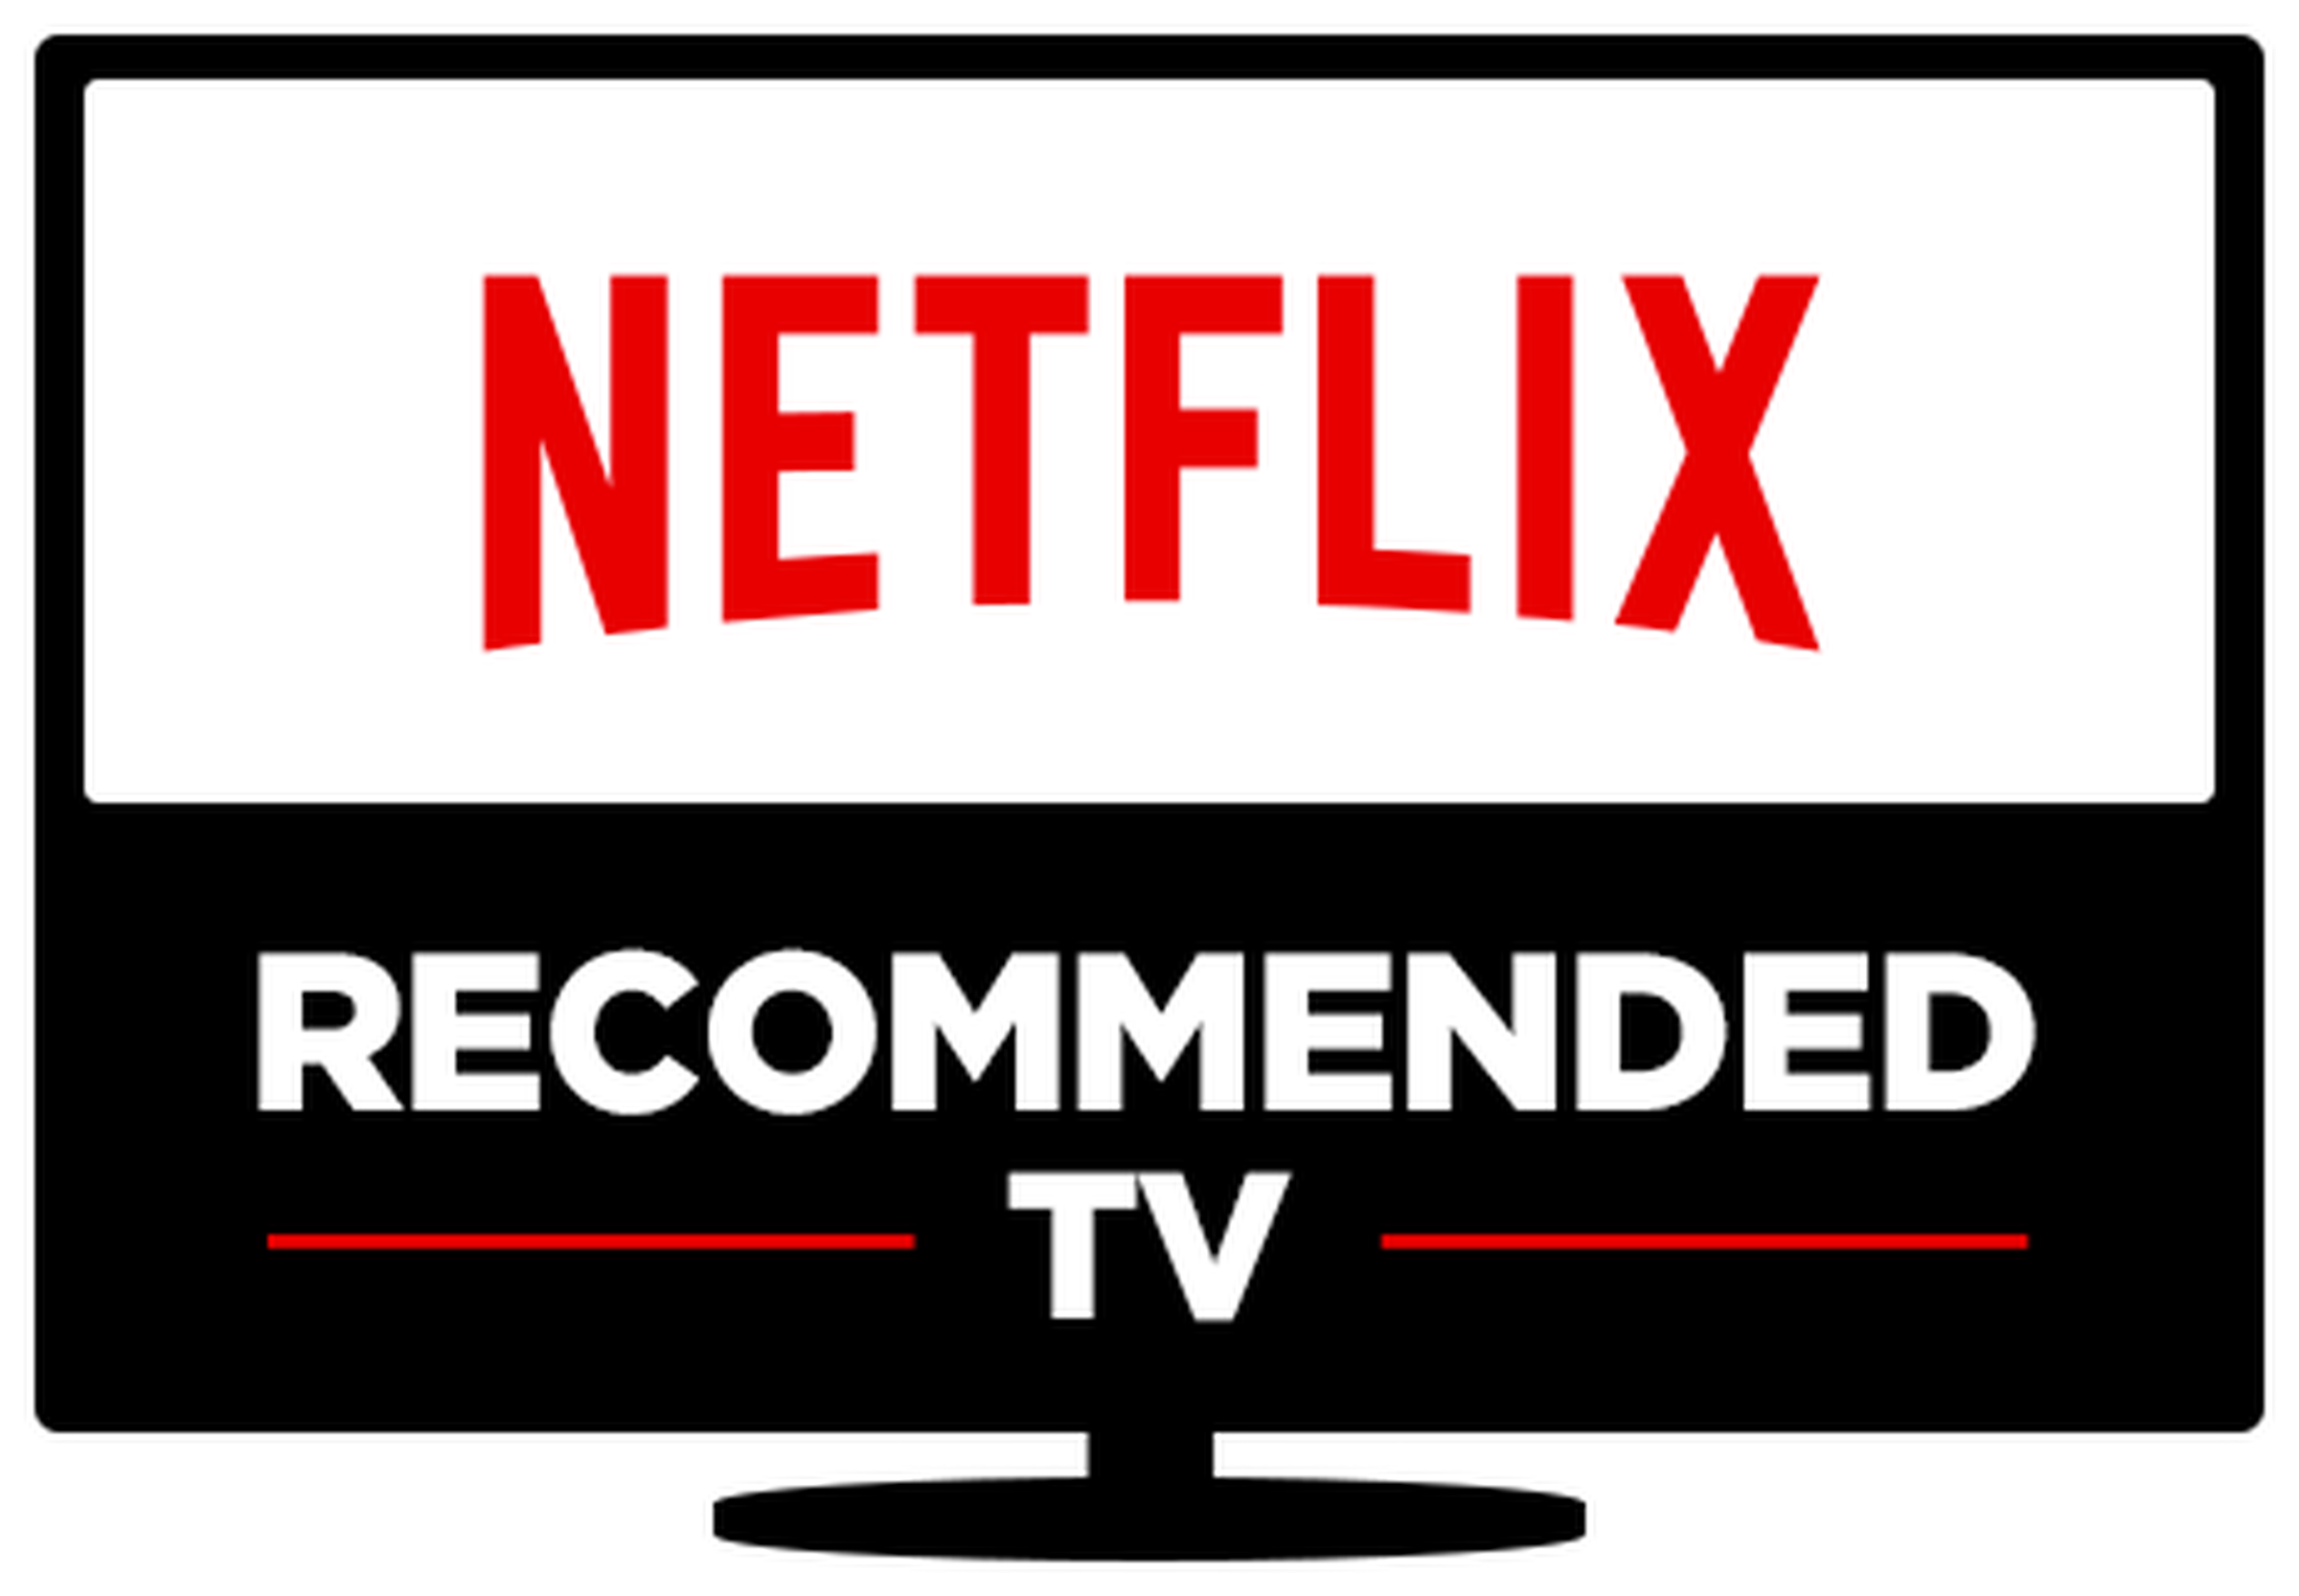 Vizio’s TVs are not among Netflix’s “recommended” sets. 